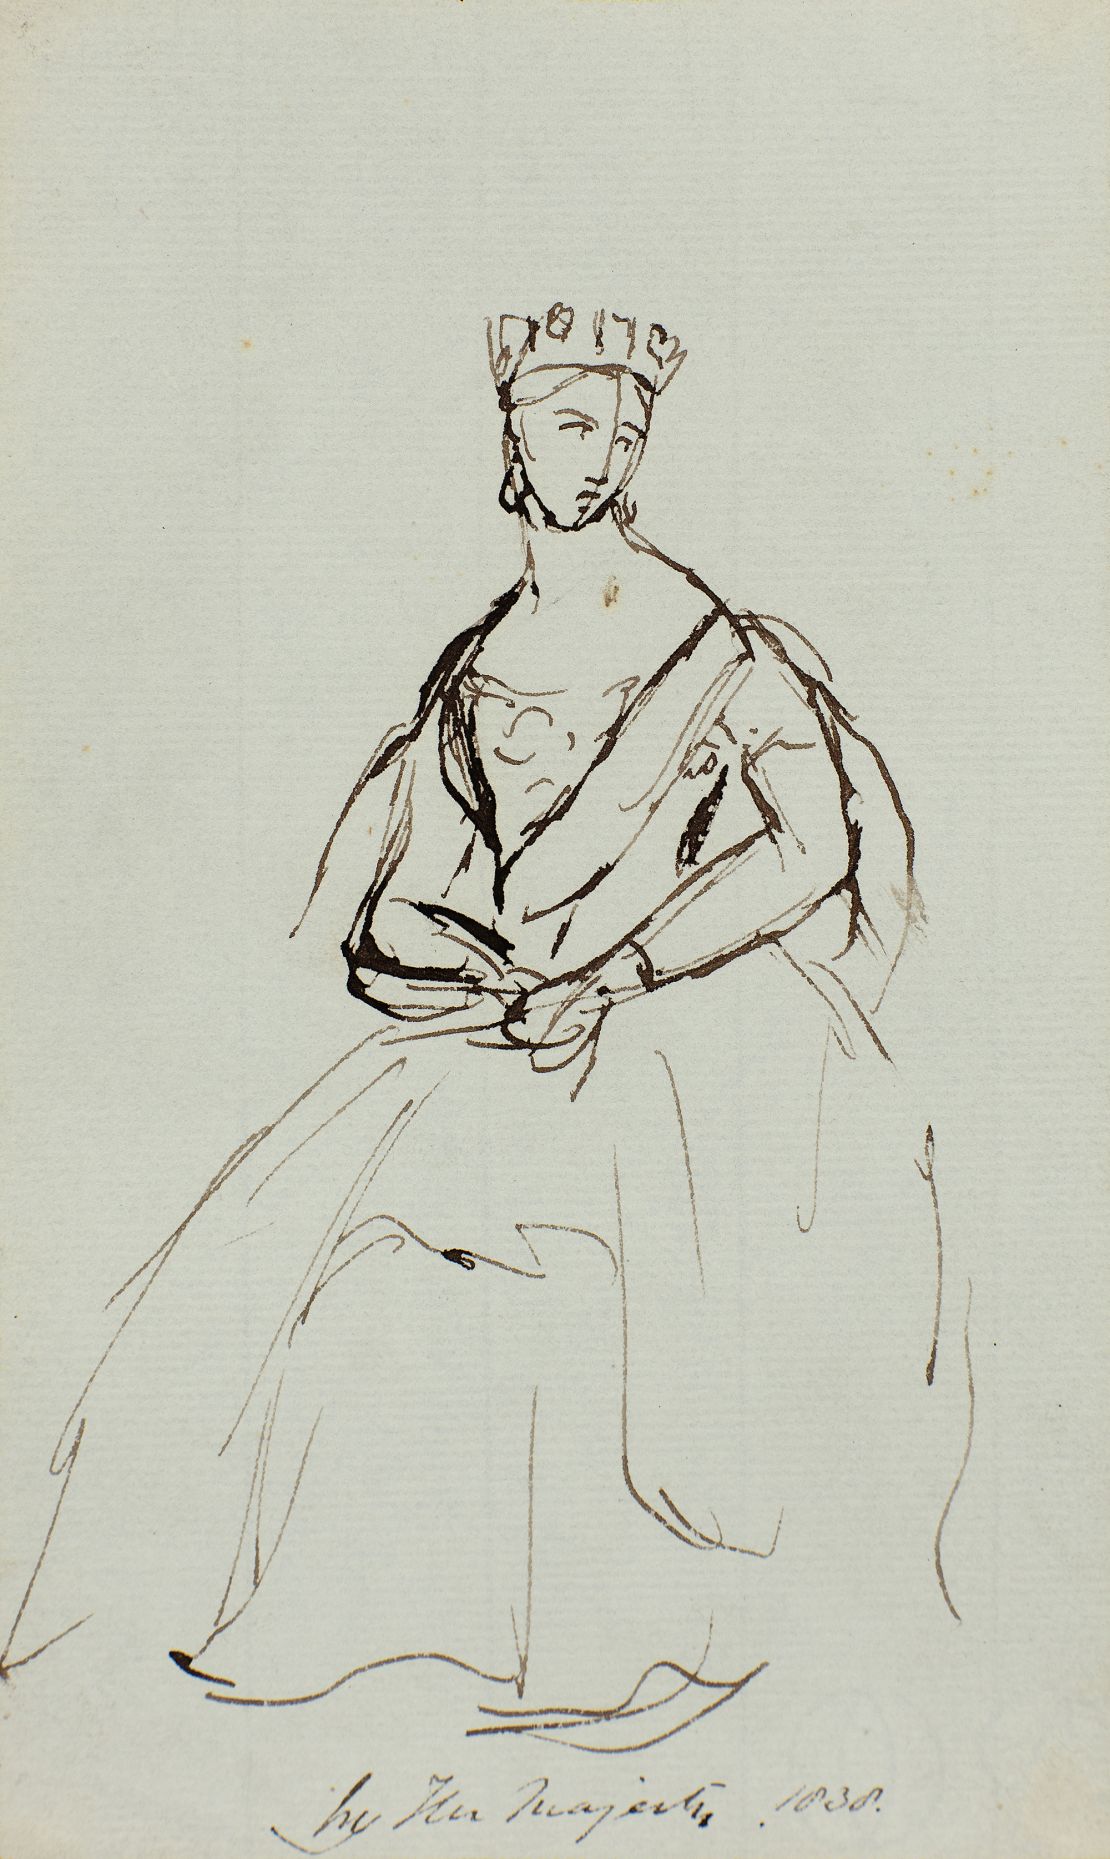 An ink drawing by Queen Victoria, titled "A seated woman with a crown and sash" and dated 1838, is inscribed "by Her Majesty."